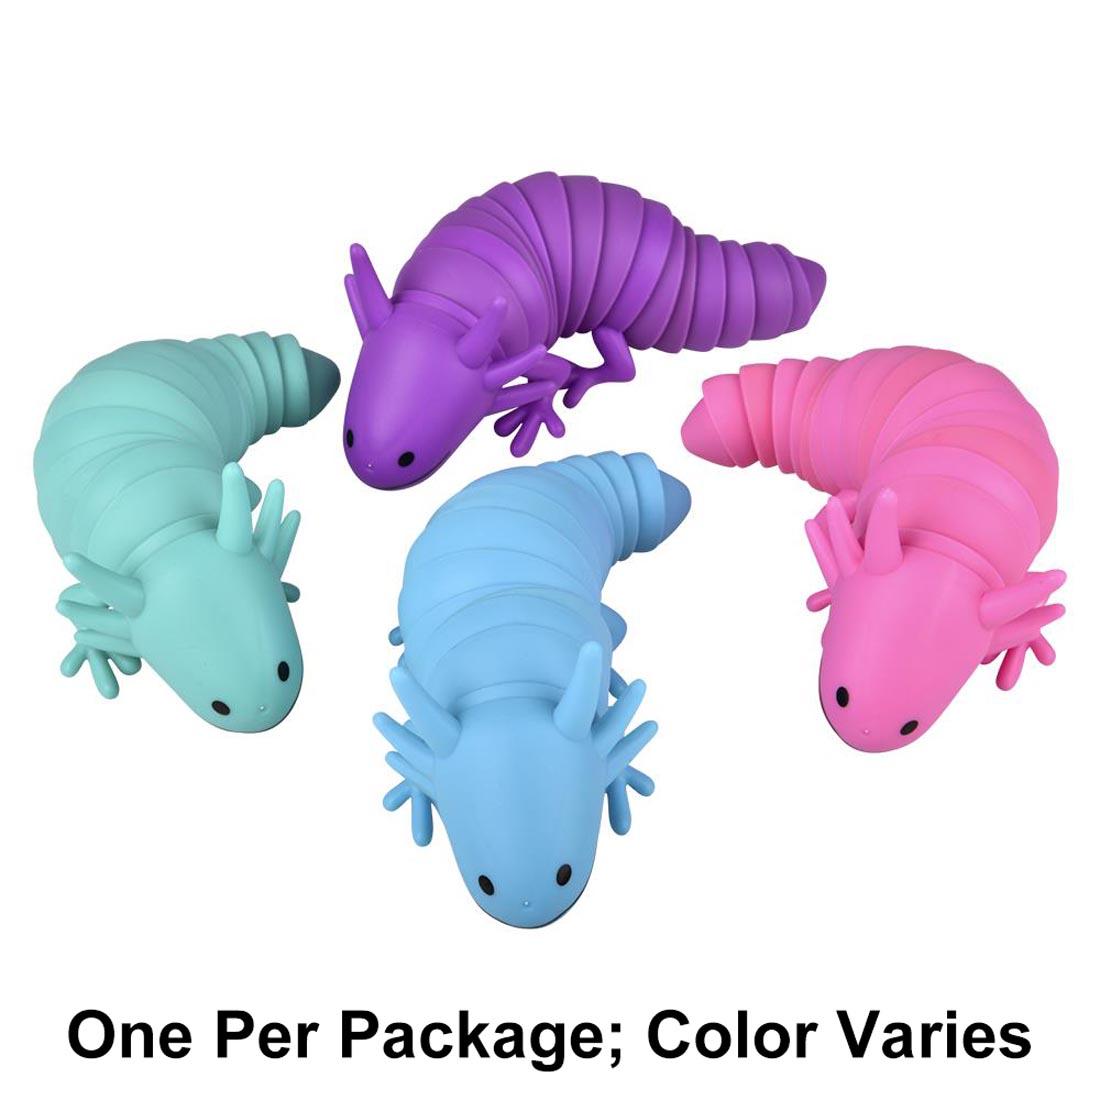 Four Sensory Wiggle Axolotls with text One Per Package; Color Varies